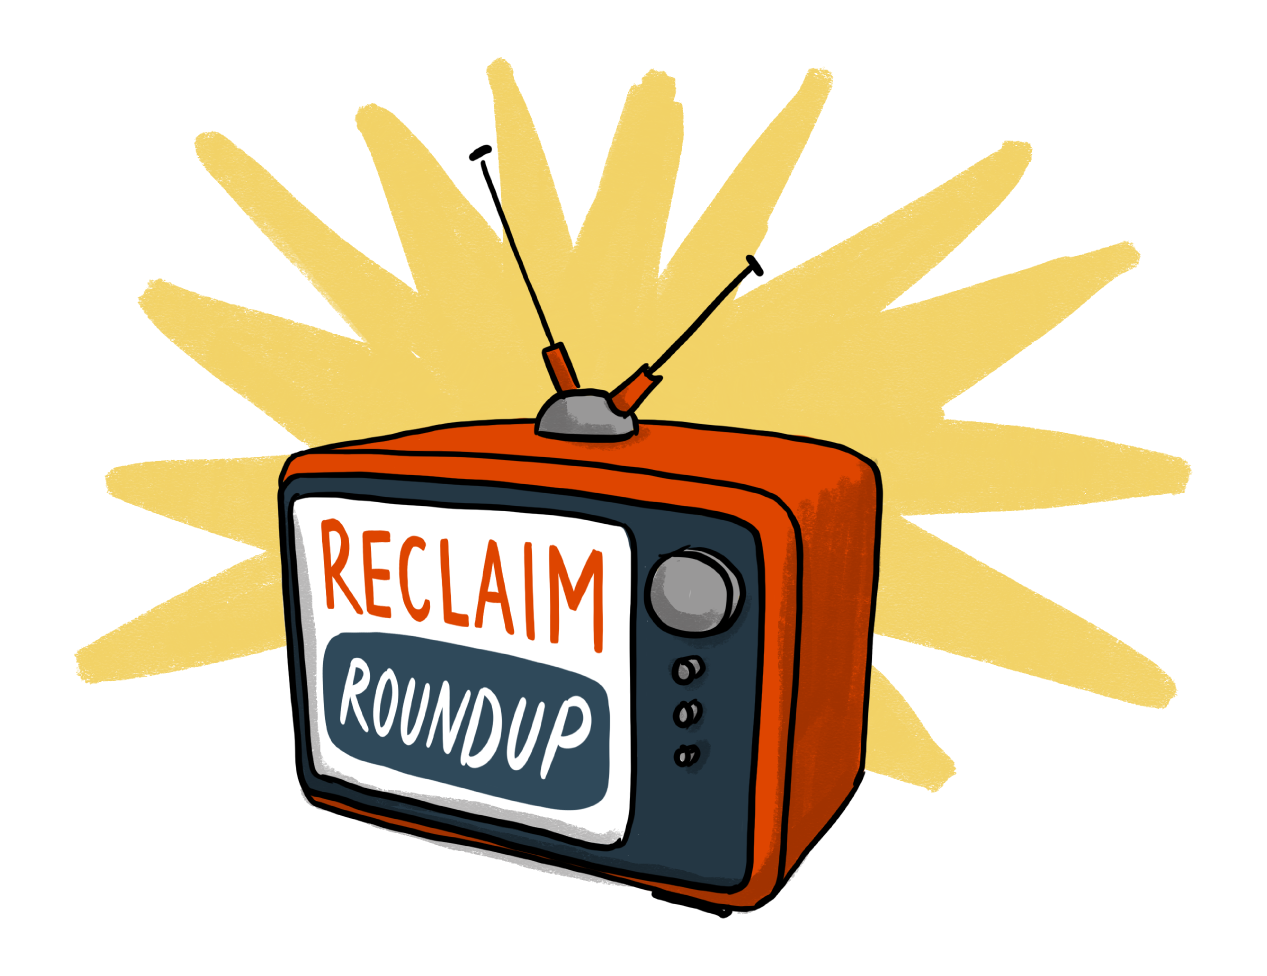 An old-fashioned red cartoon TV with antennae, on a yellow starburst background. The TV screen reads "Reclaim Roundup.